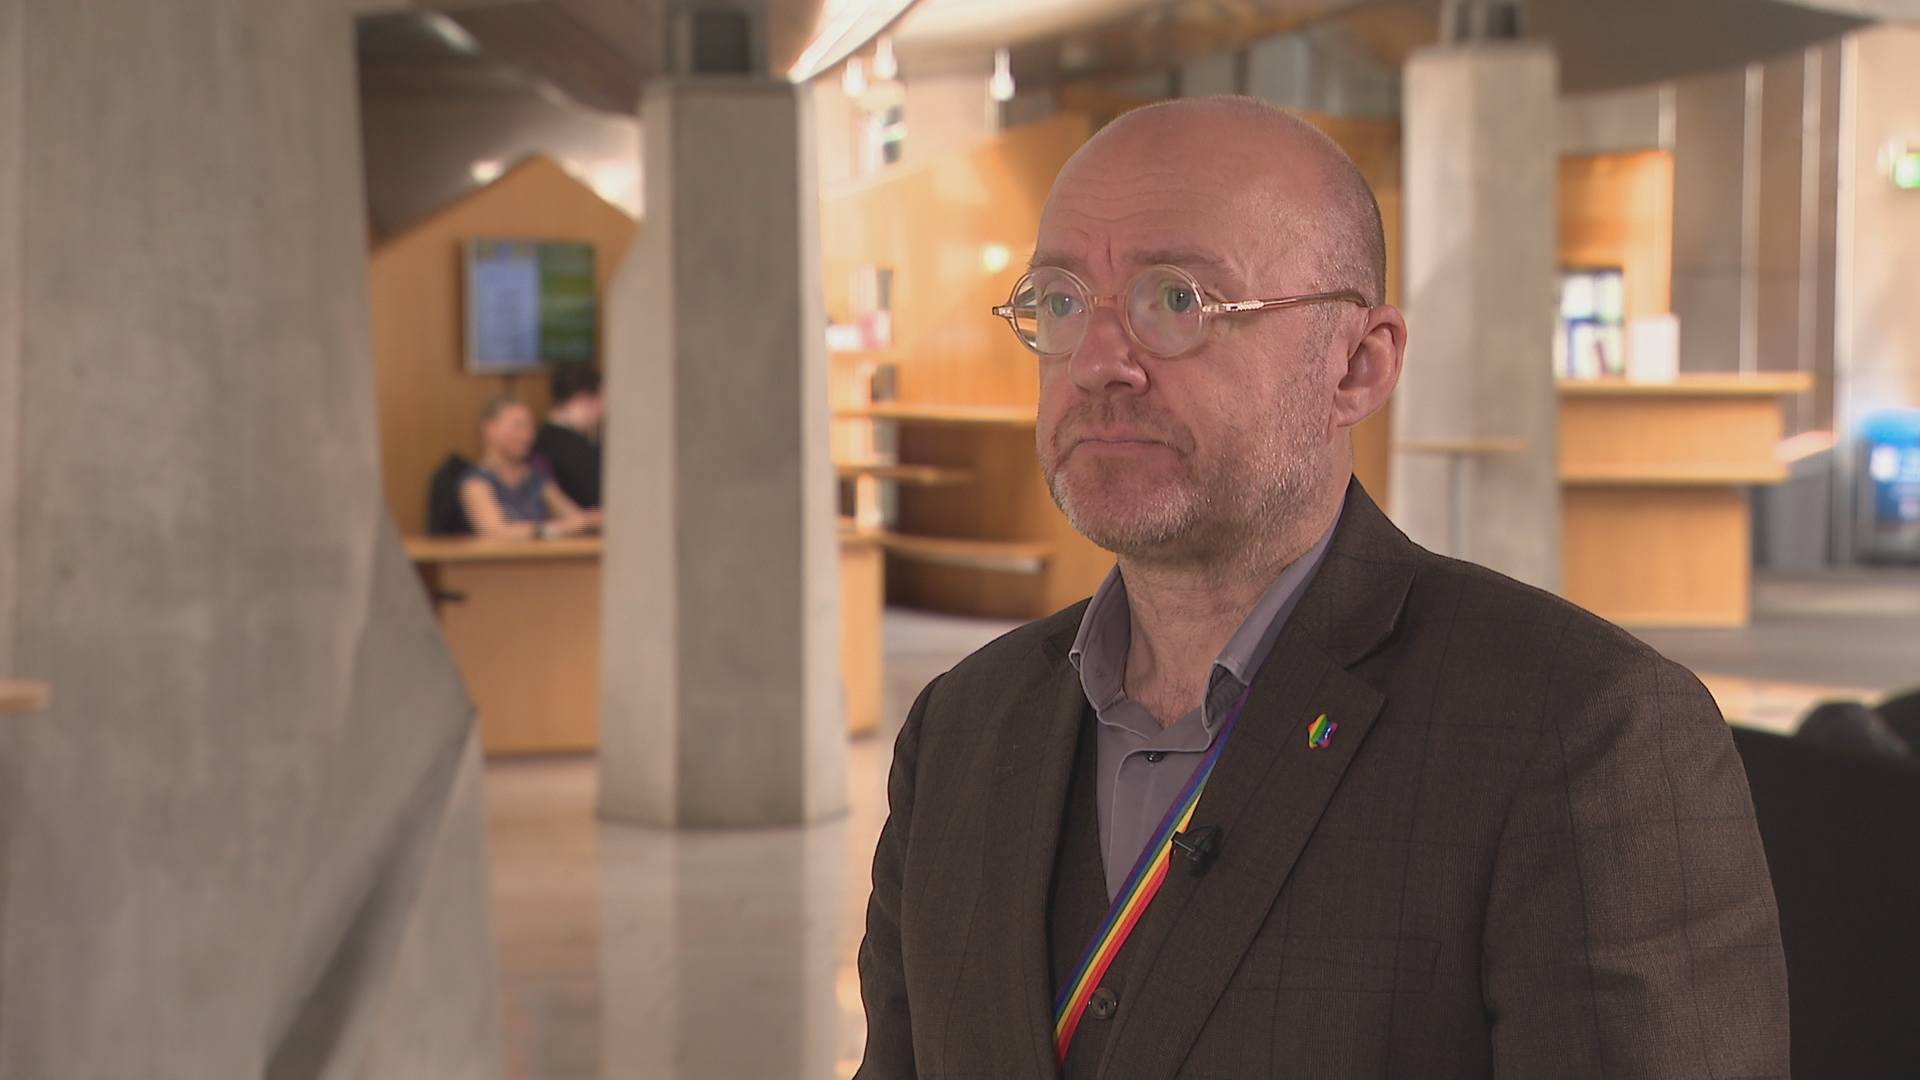 Patrick Harvie told STV News that he would not resign from his post in protest at the decision.